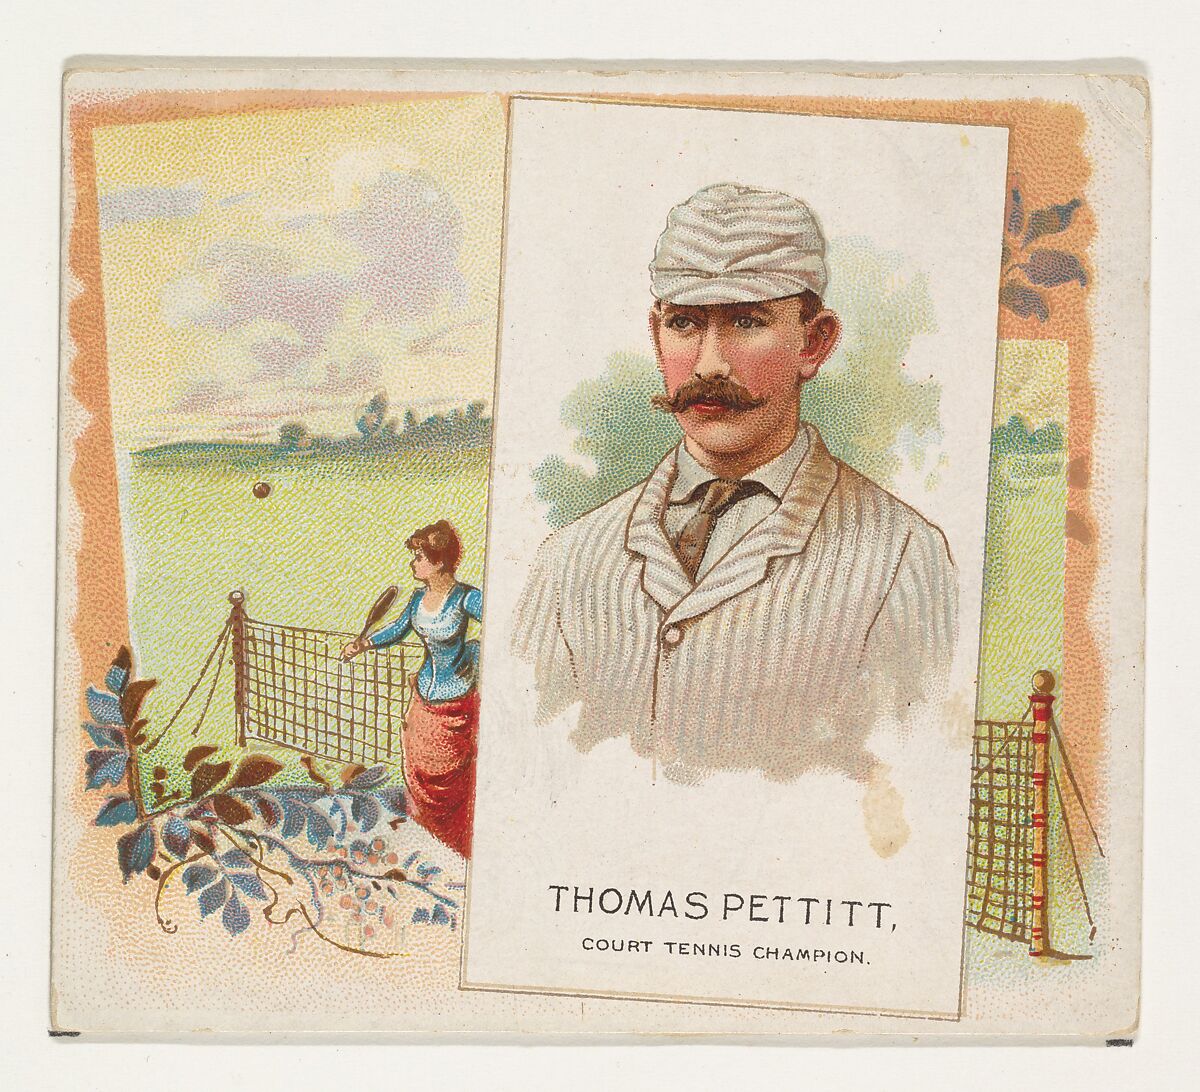 Thomas Pettitt, Court Tennis Champion, from World's Champions, Second Series (N43) for Allen & Ginter Cigarettes, Allen &amp; Ginter (American, Richmond, Virginia), Commercial lithograph 